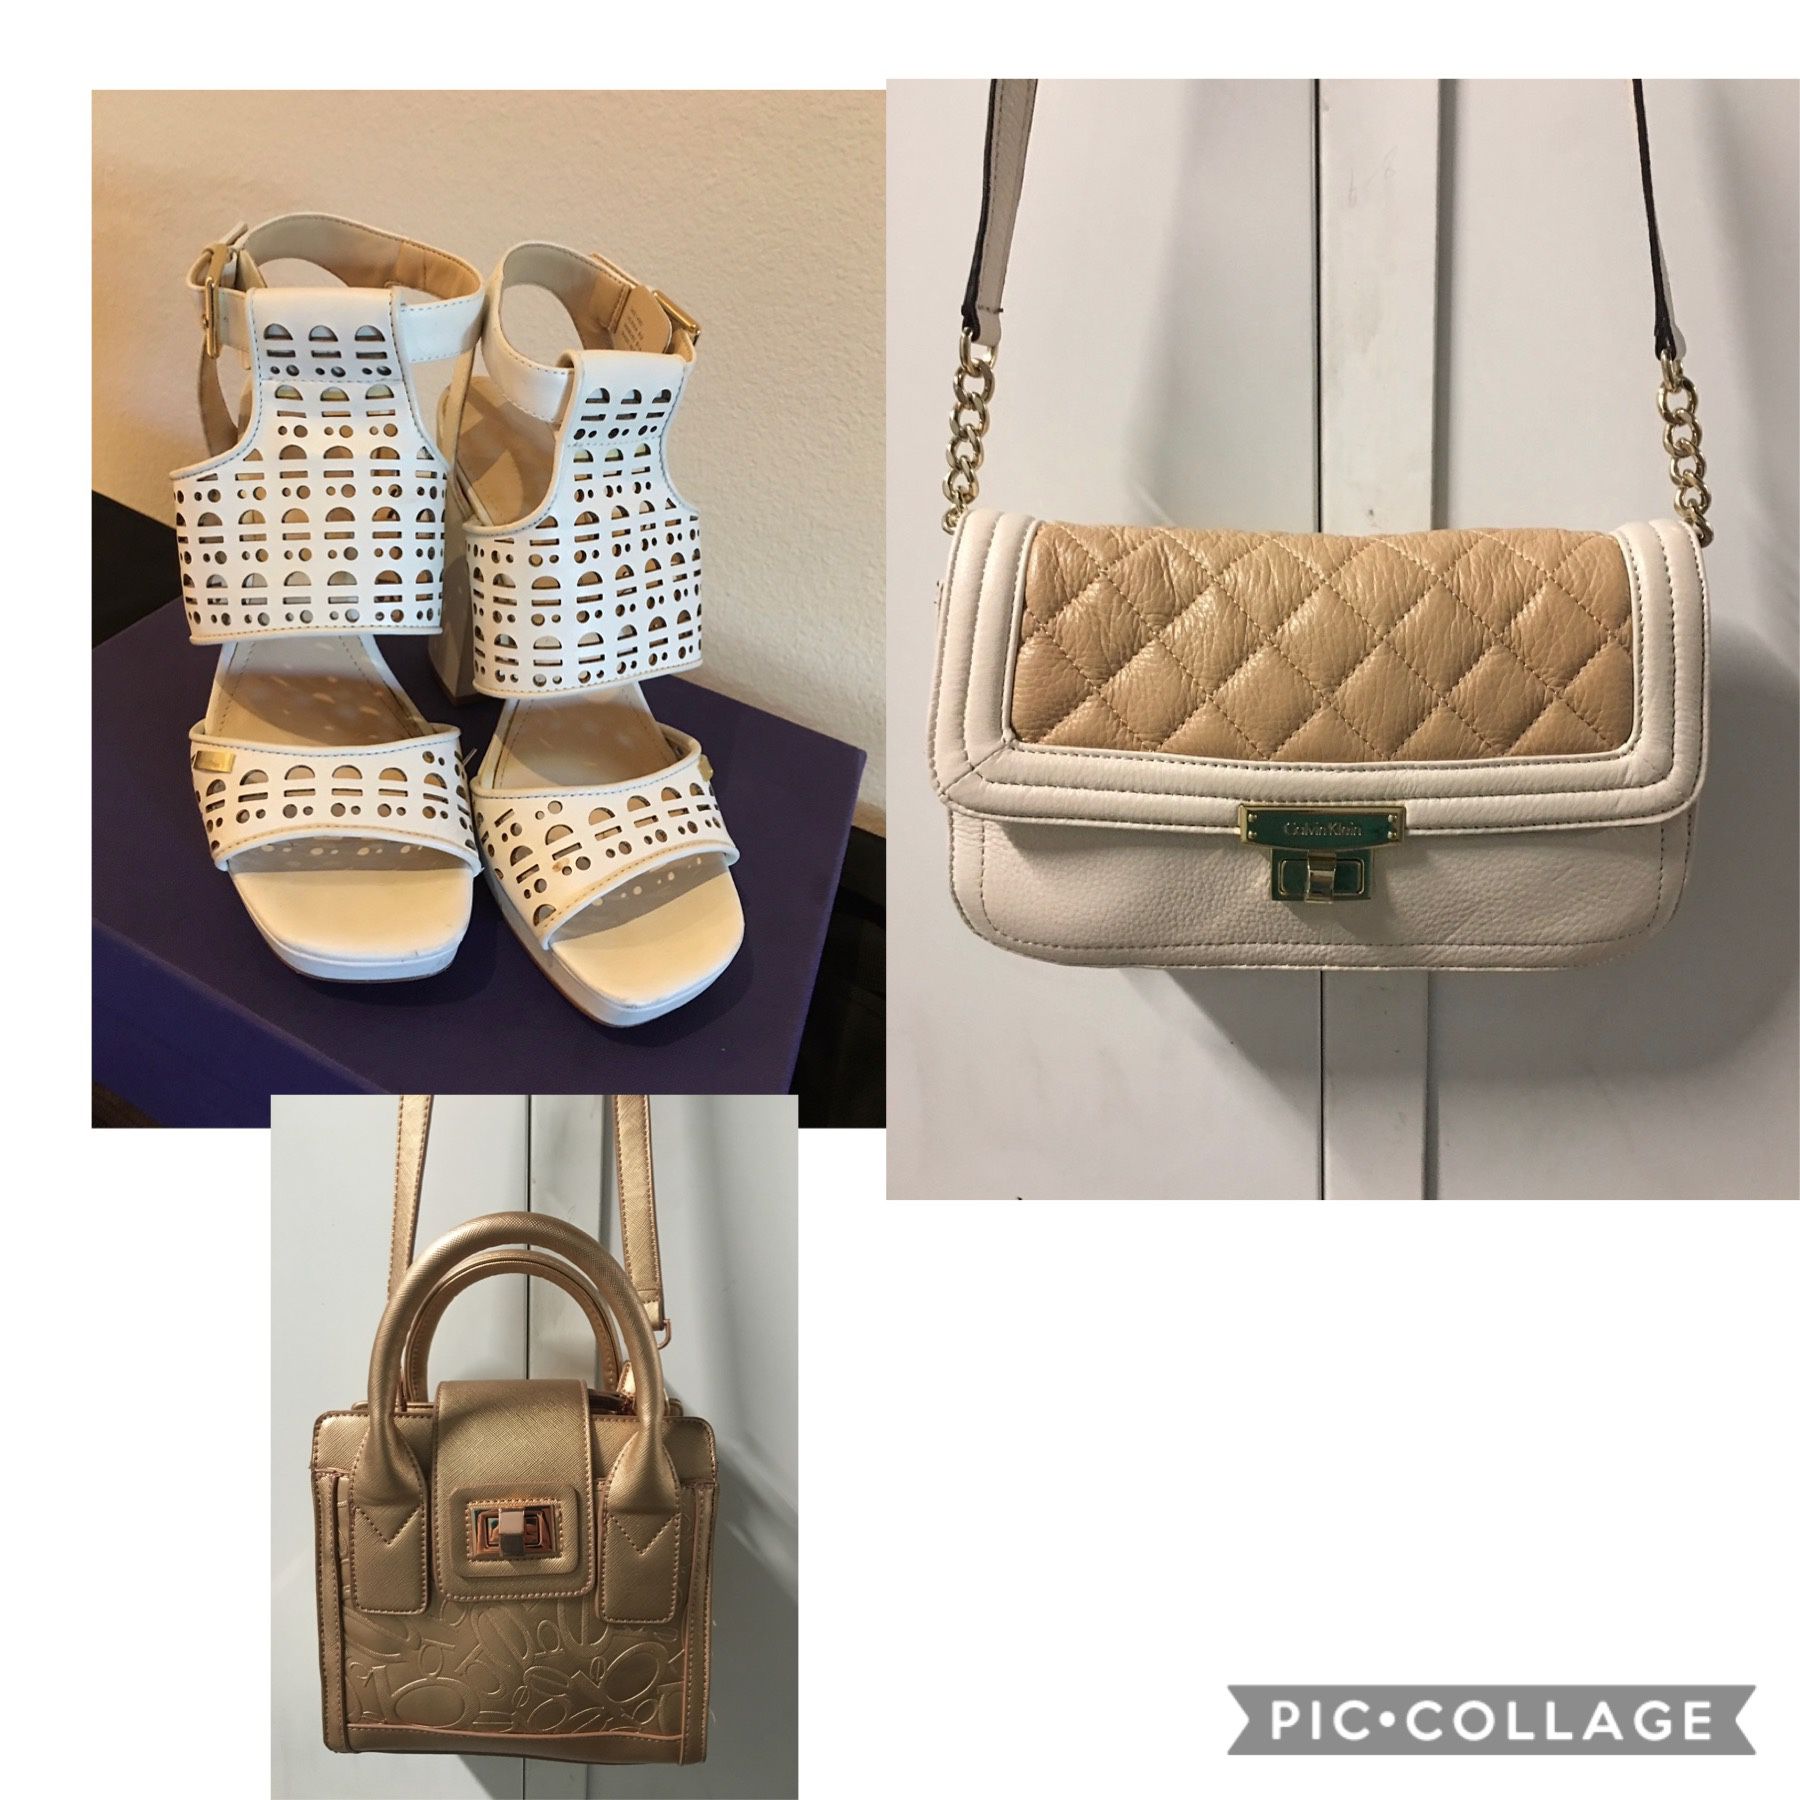 All for the price of one ... Genuine Leather Shoes & Purse by CK & BeBe purse